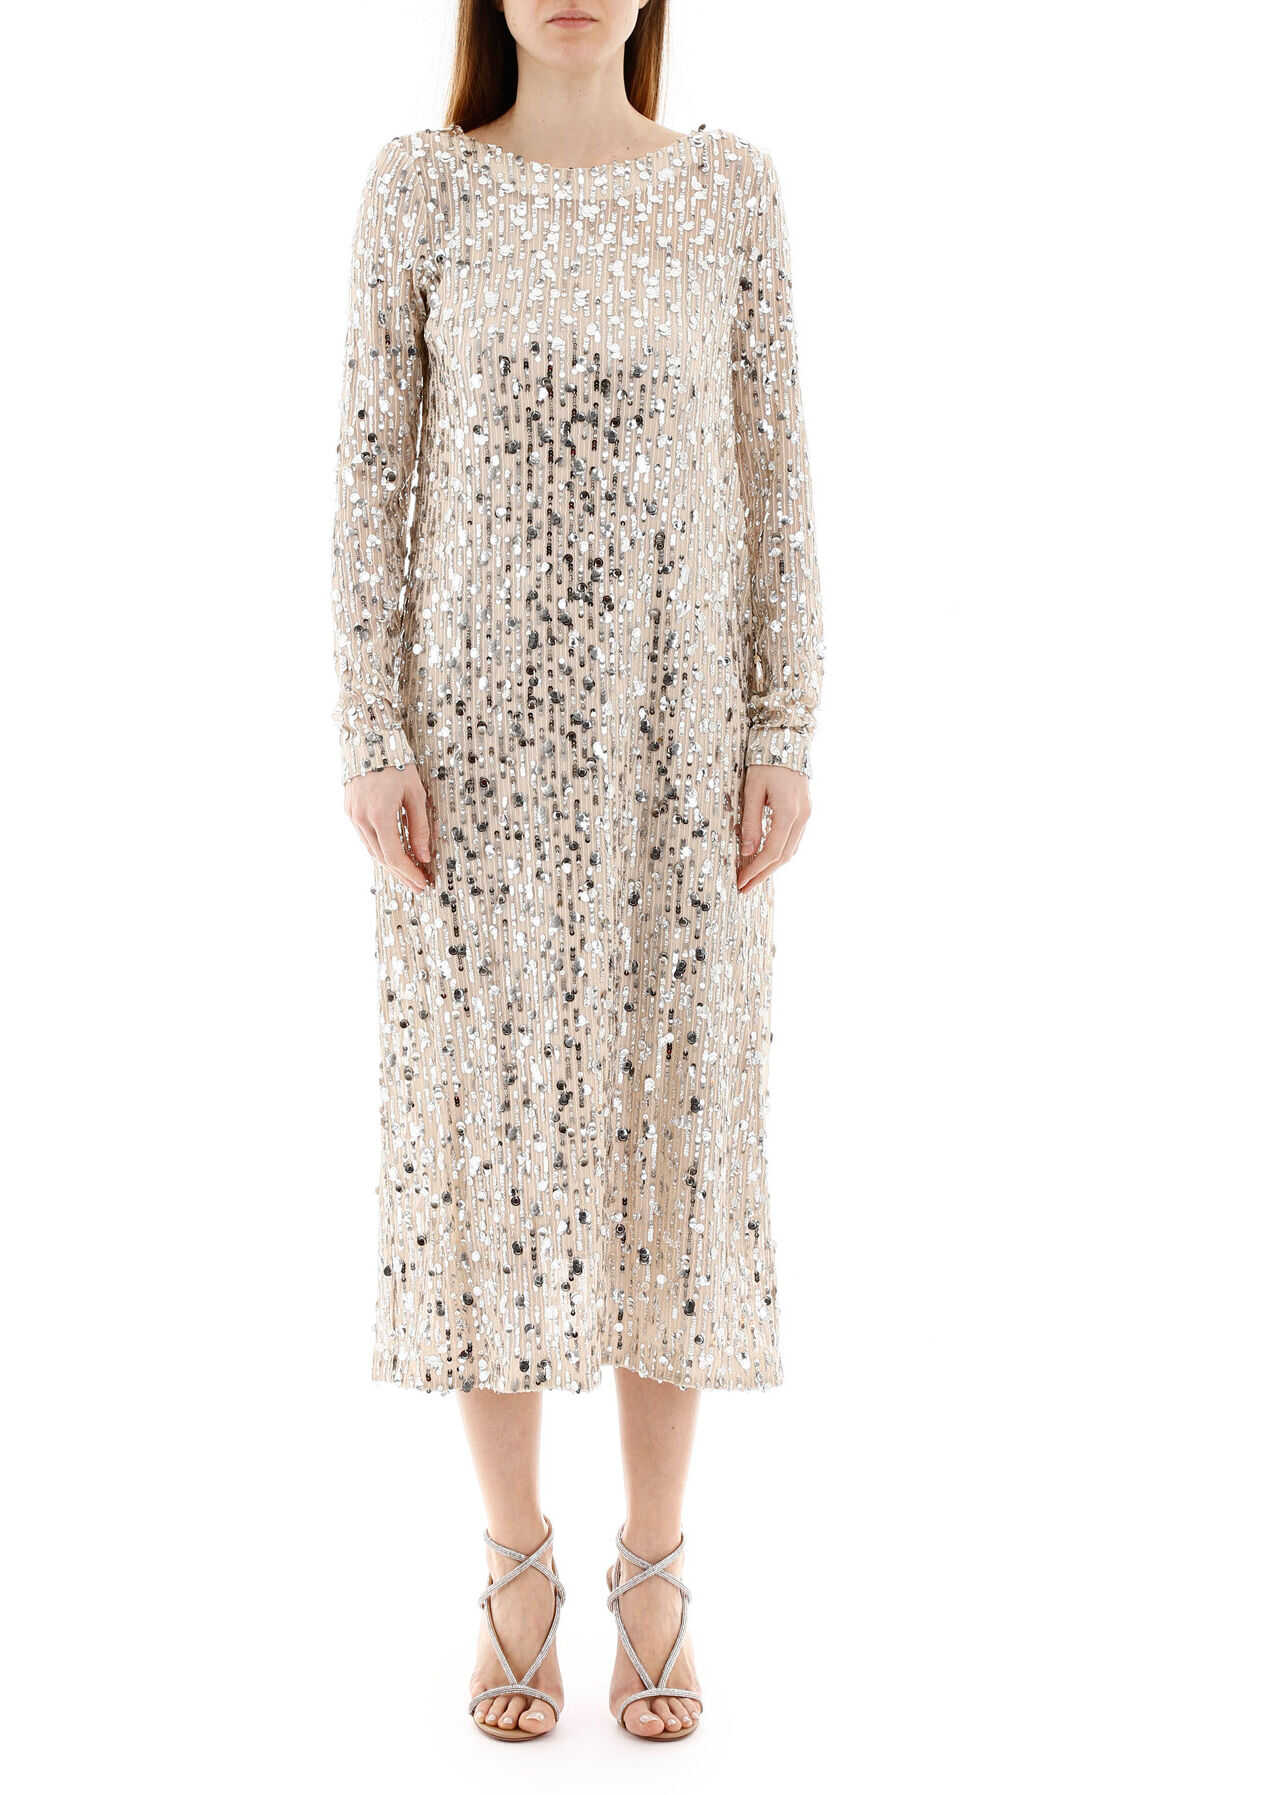 In The Mood For Love Christy Midi Dress With Sequins CHRISTY DRESS BEIGE SILVER